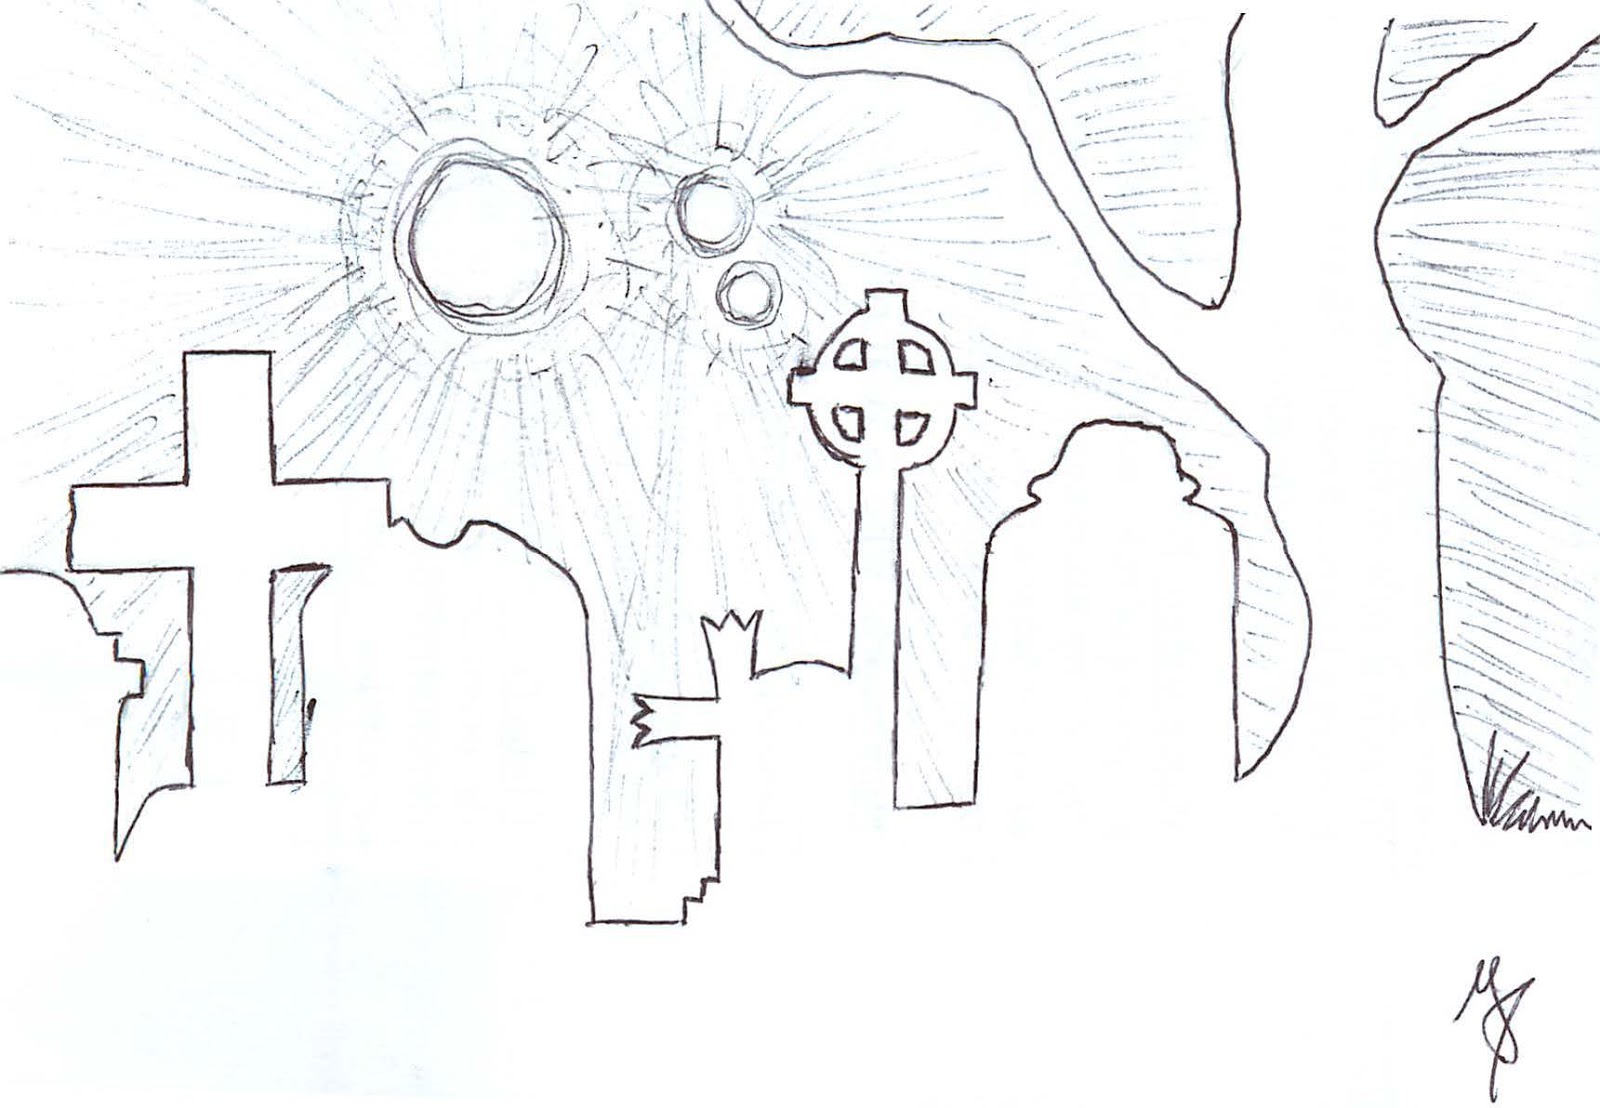 Graveyard Drawing - How To Draw A Graveyard Step By Step